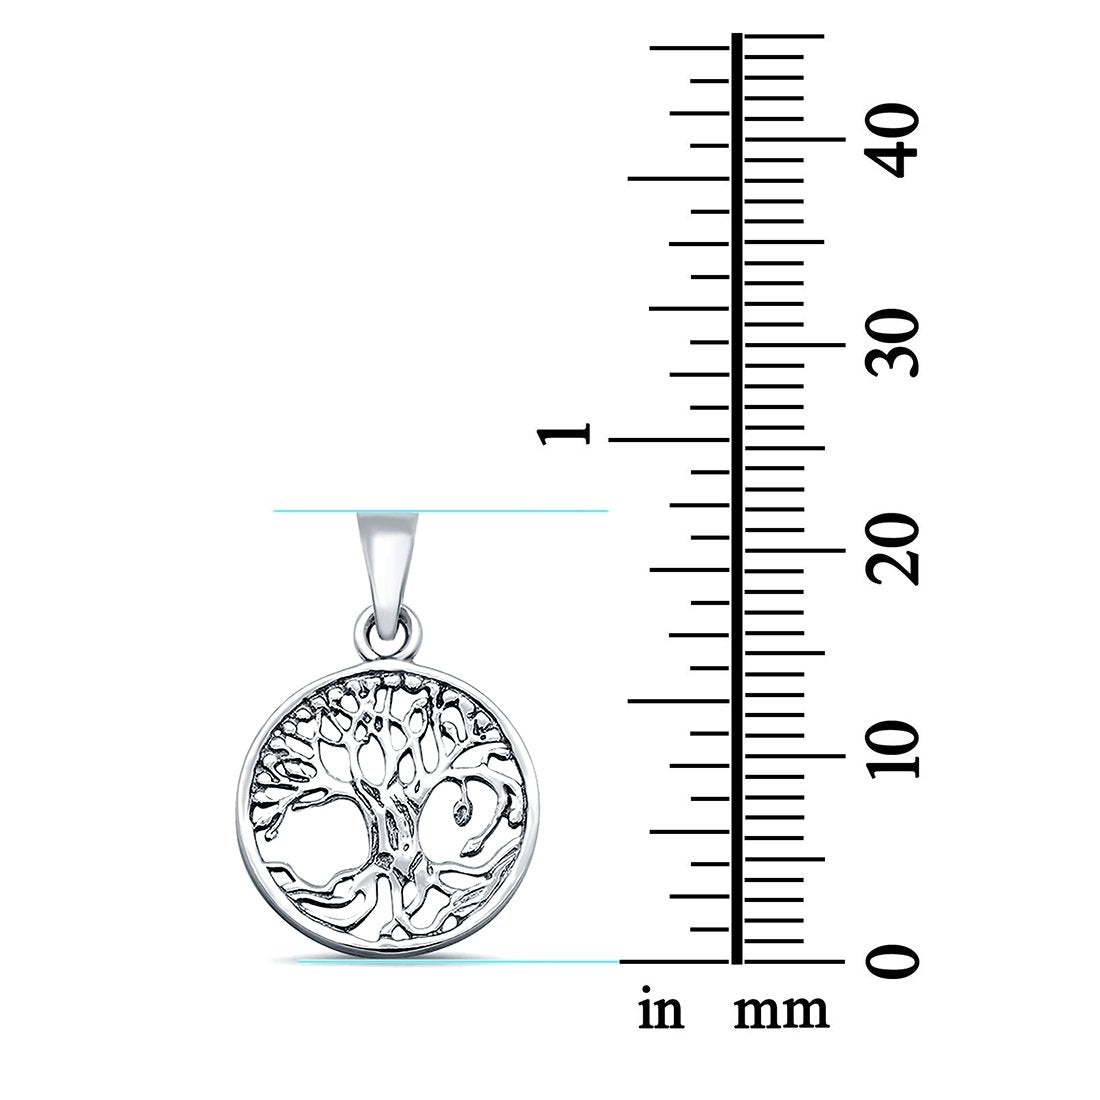 Plain Tree of Life Round Pendant Charm 925 Sterling Silver (18mm x 22mm)